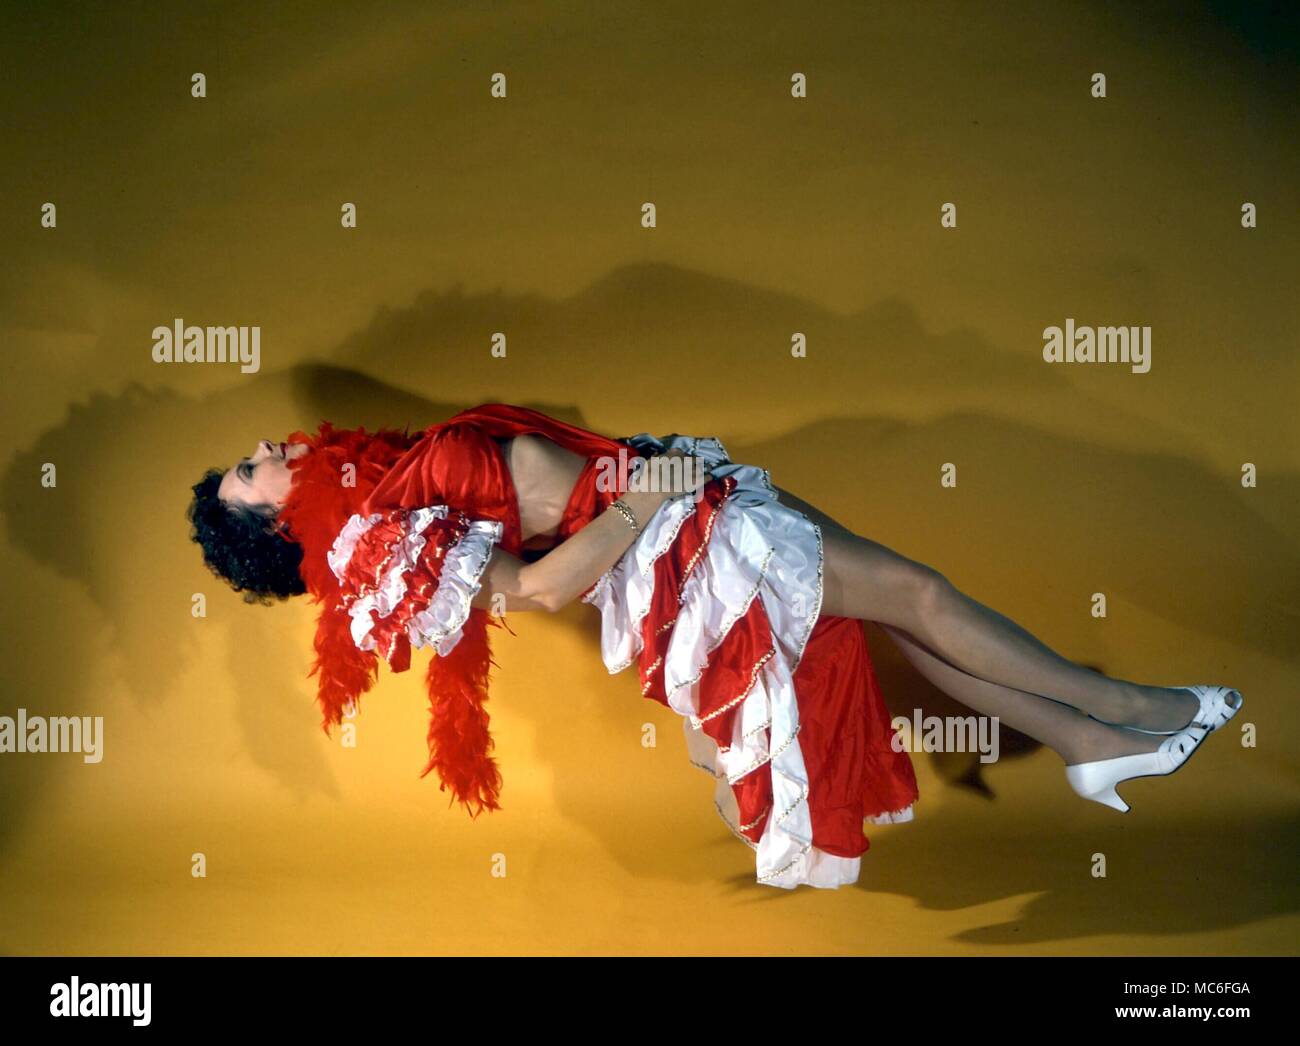 levitation, stage magic, illusion. woman apparently floating in mid air Stock Photo